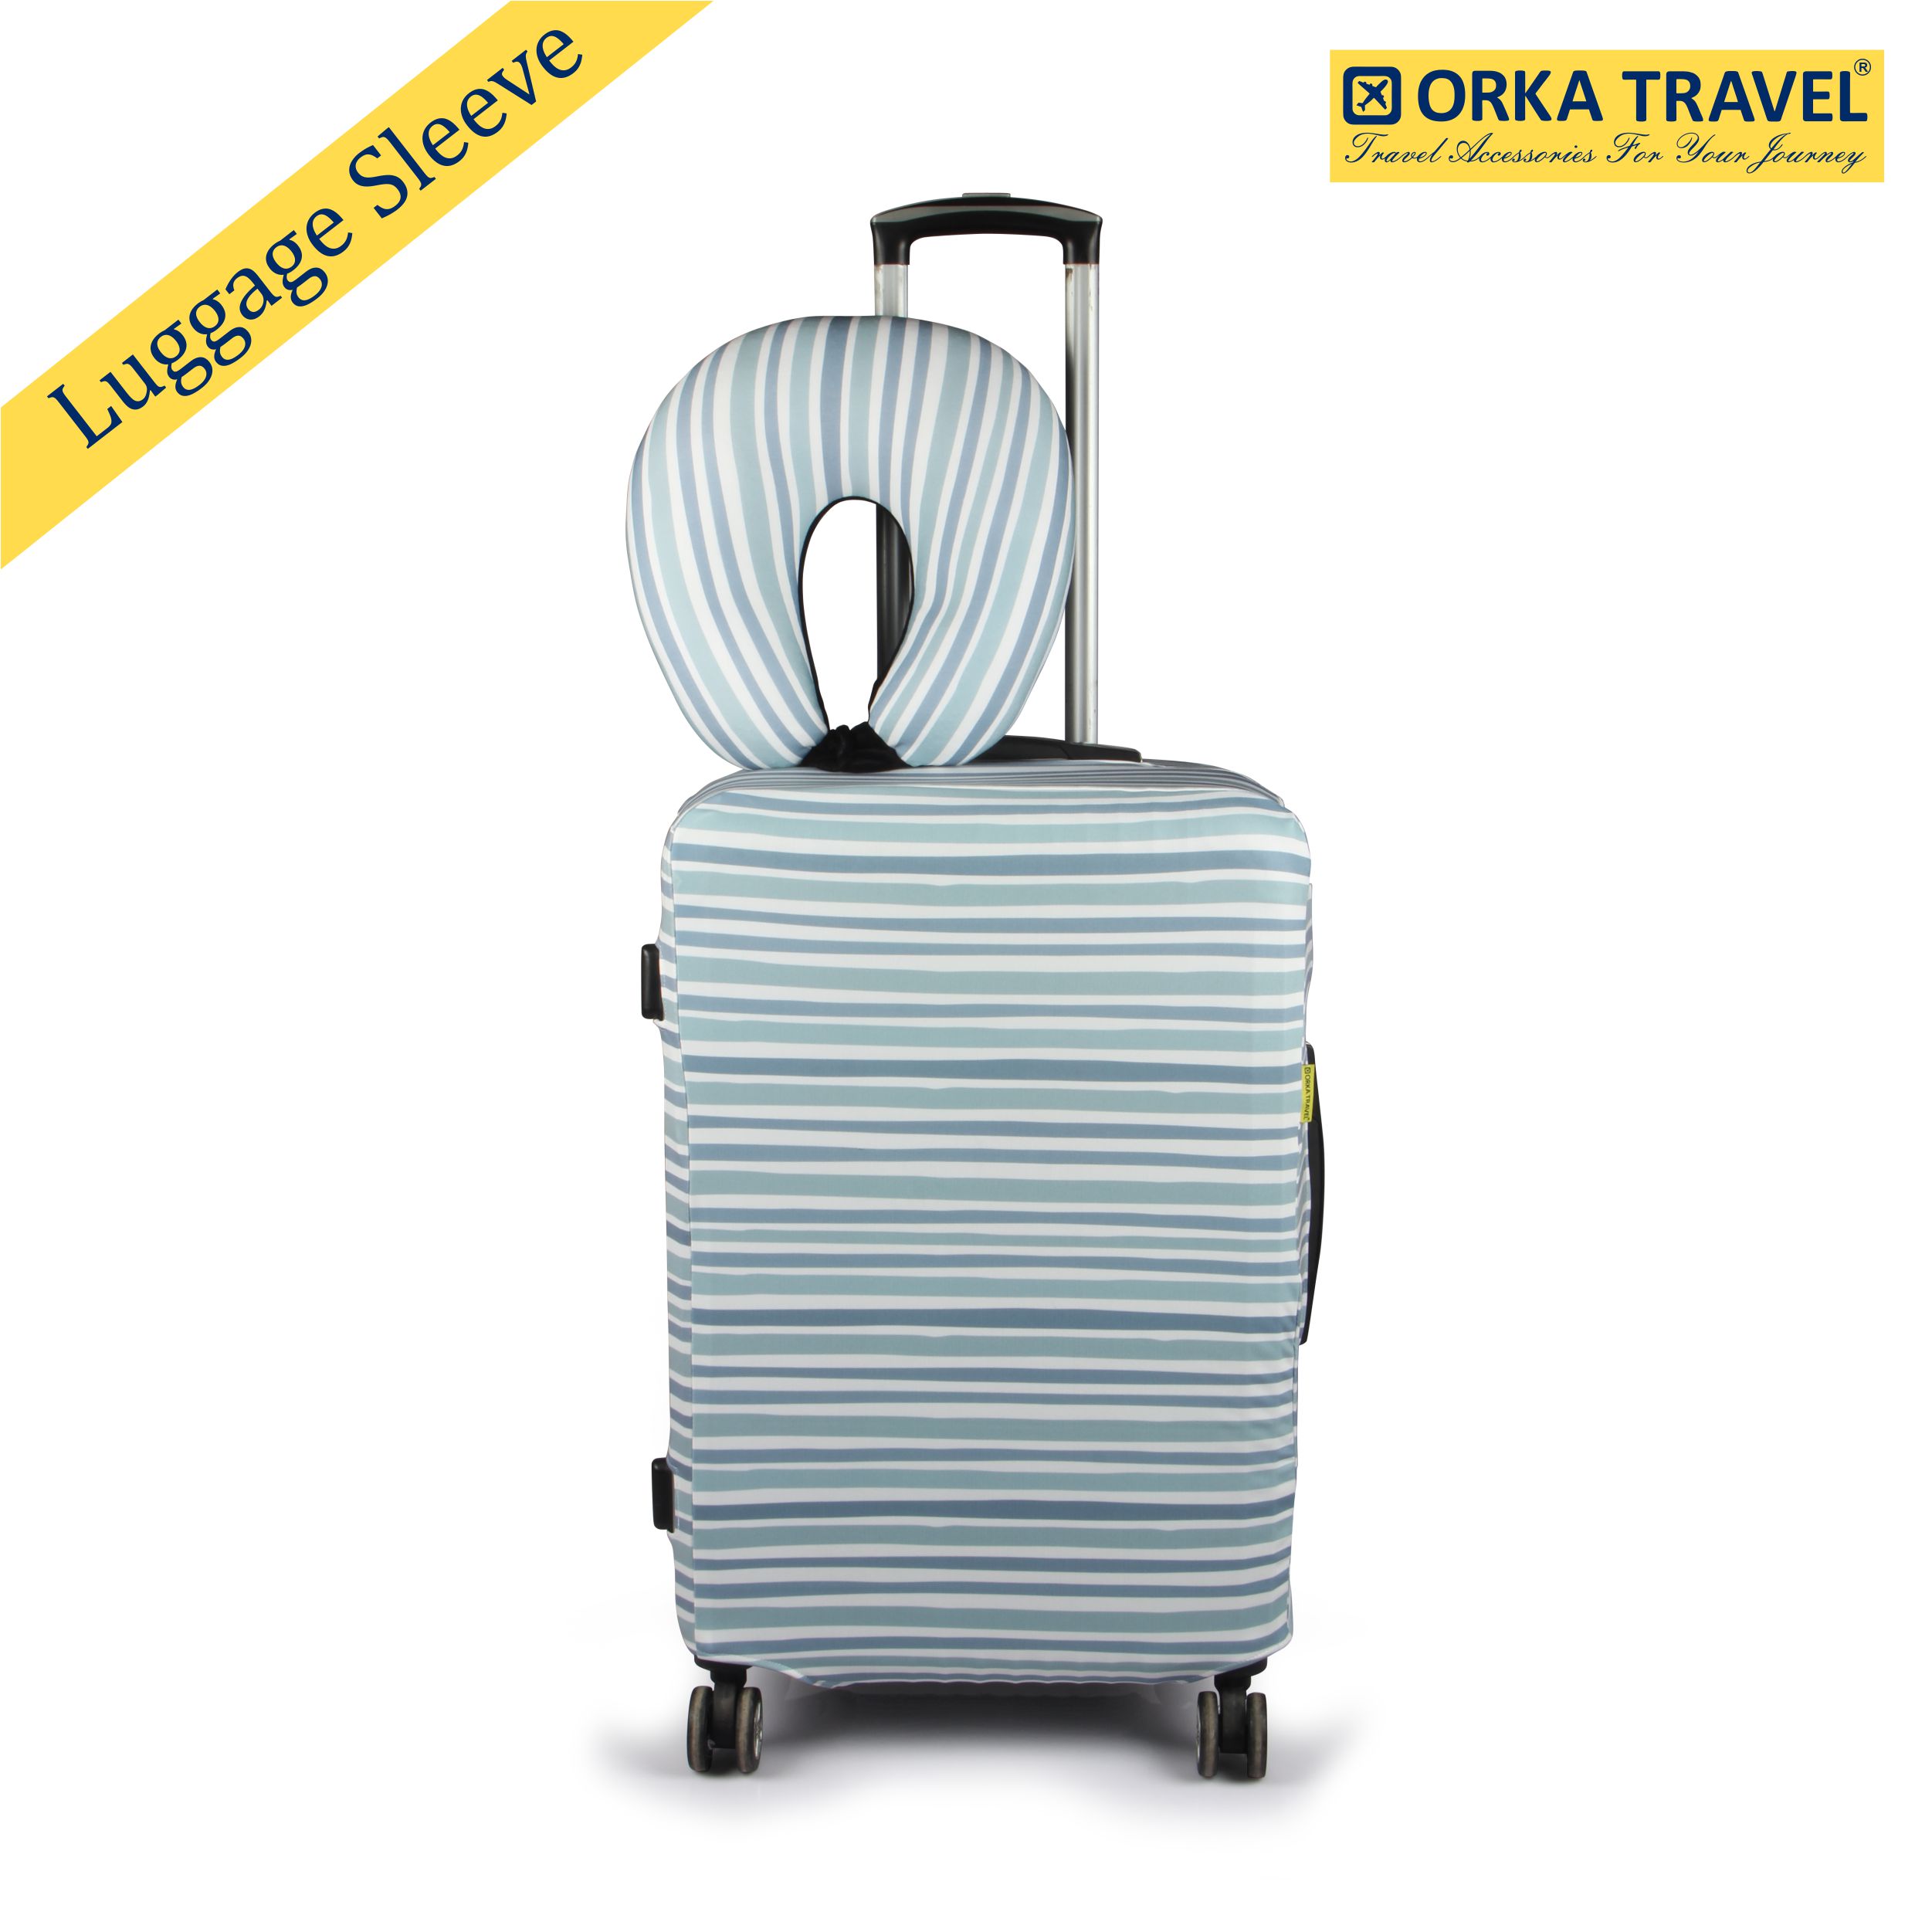 ORKA Travel Linear Theme Luggage Protector With Matching U Neck Pillow Luggage Cover  